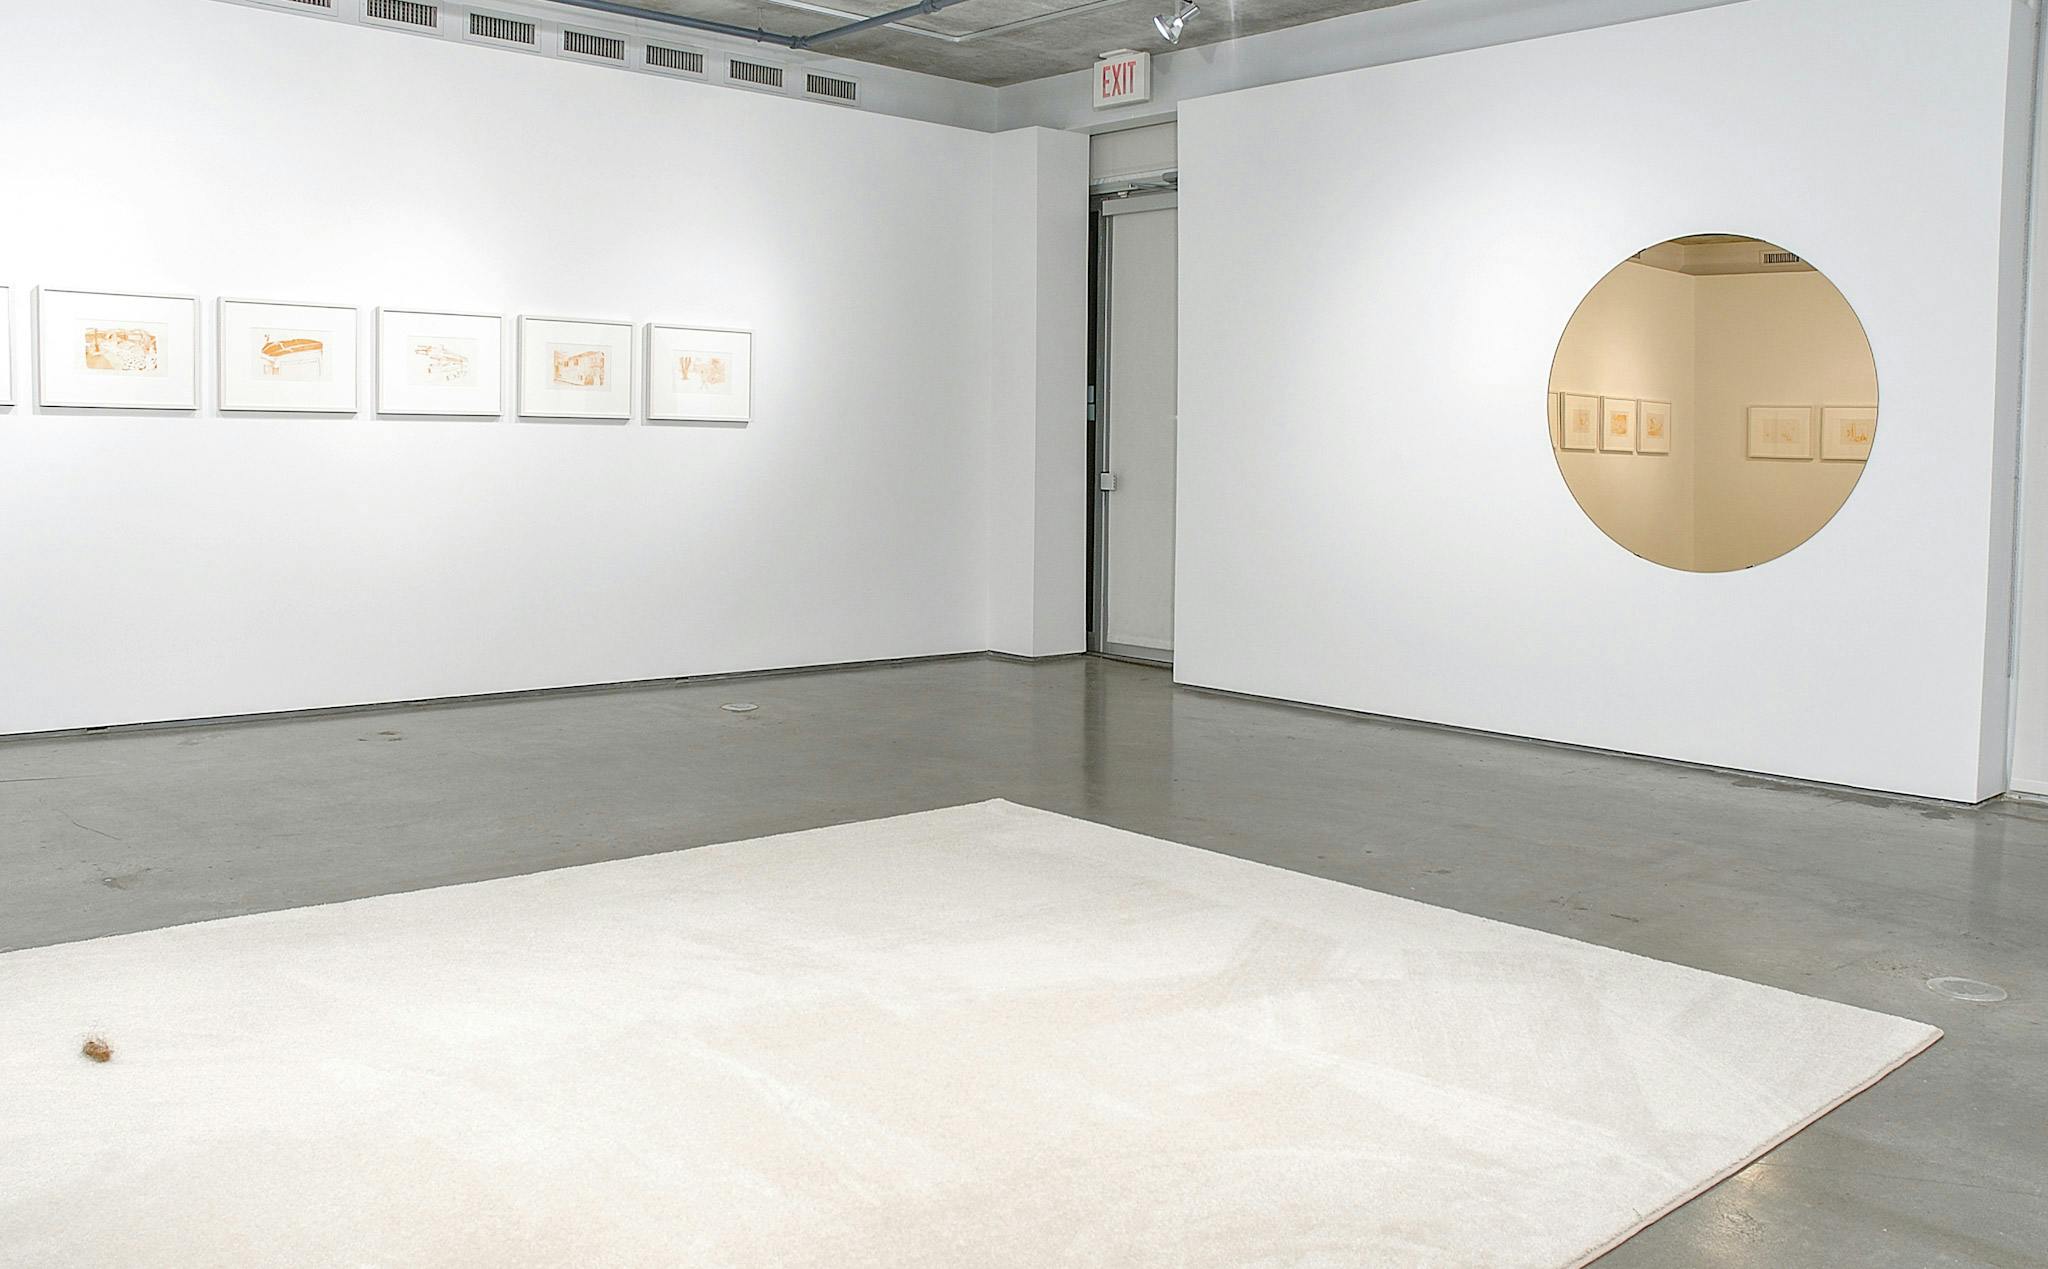 Orange drawings in white frames mounted on one wall of a gallery. On the perpendicular wall, a circular mirror reflects more of these drawings. There is a large white rug on the floor in the space.